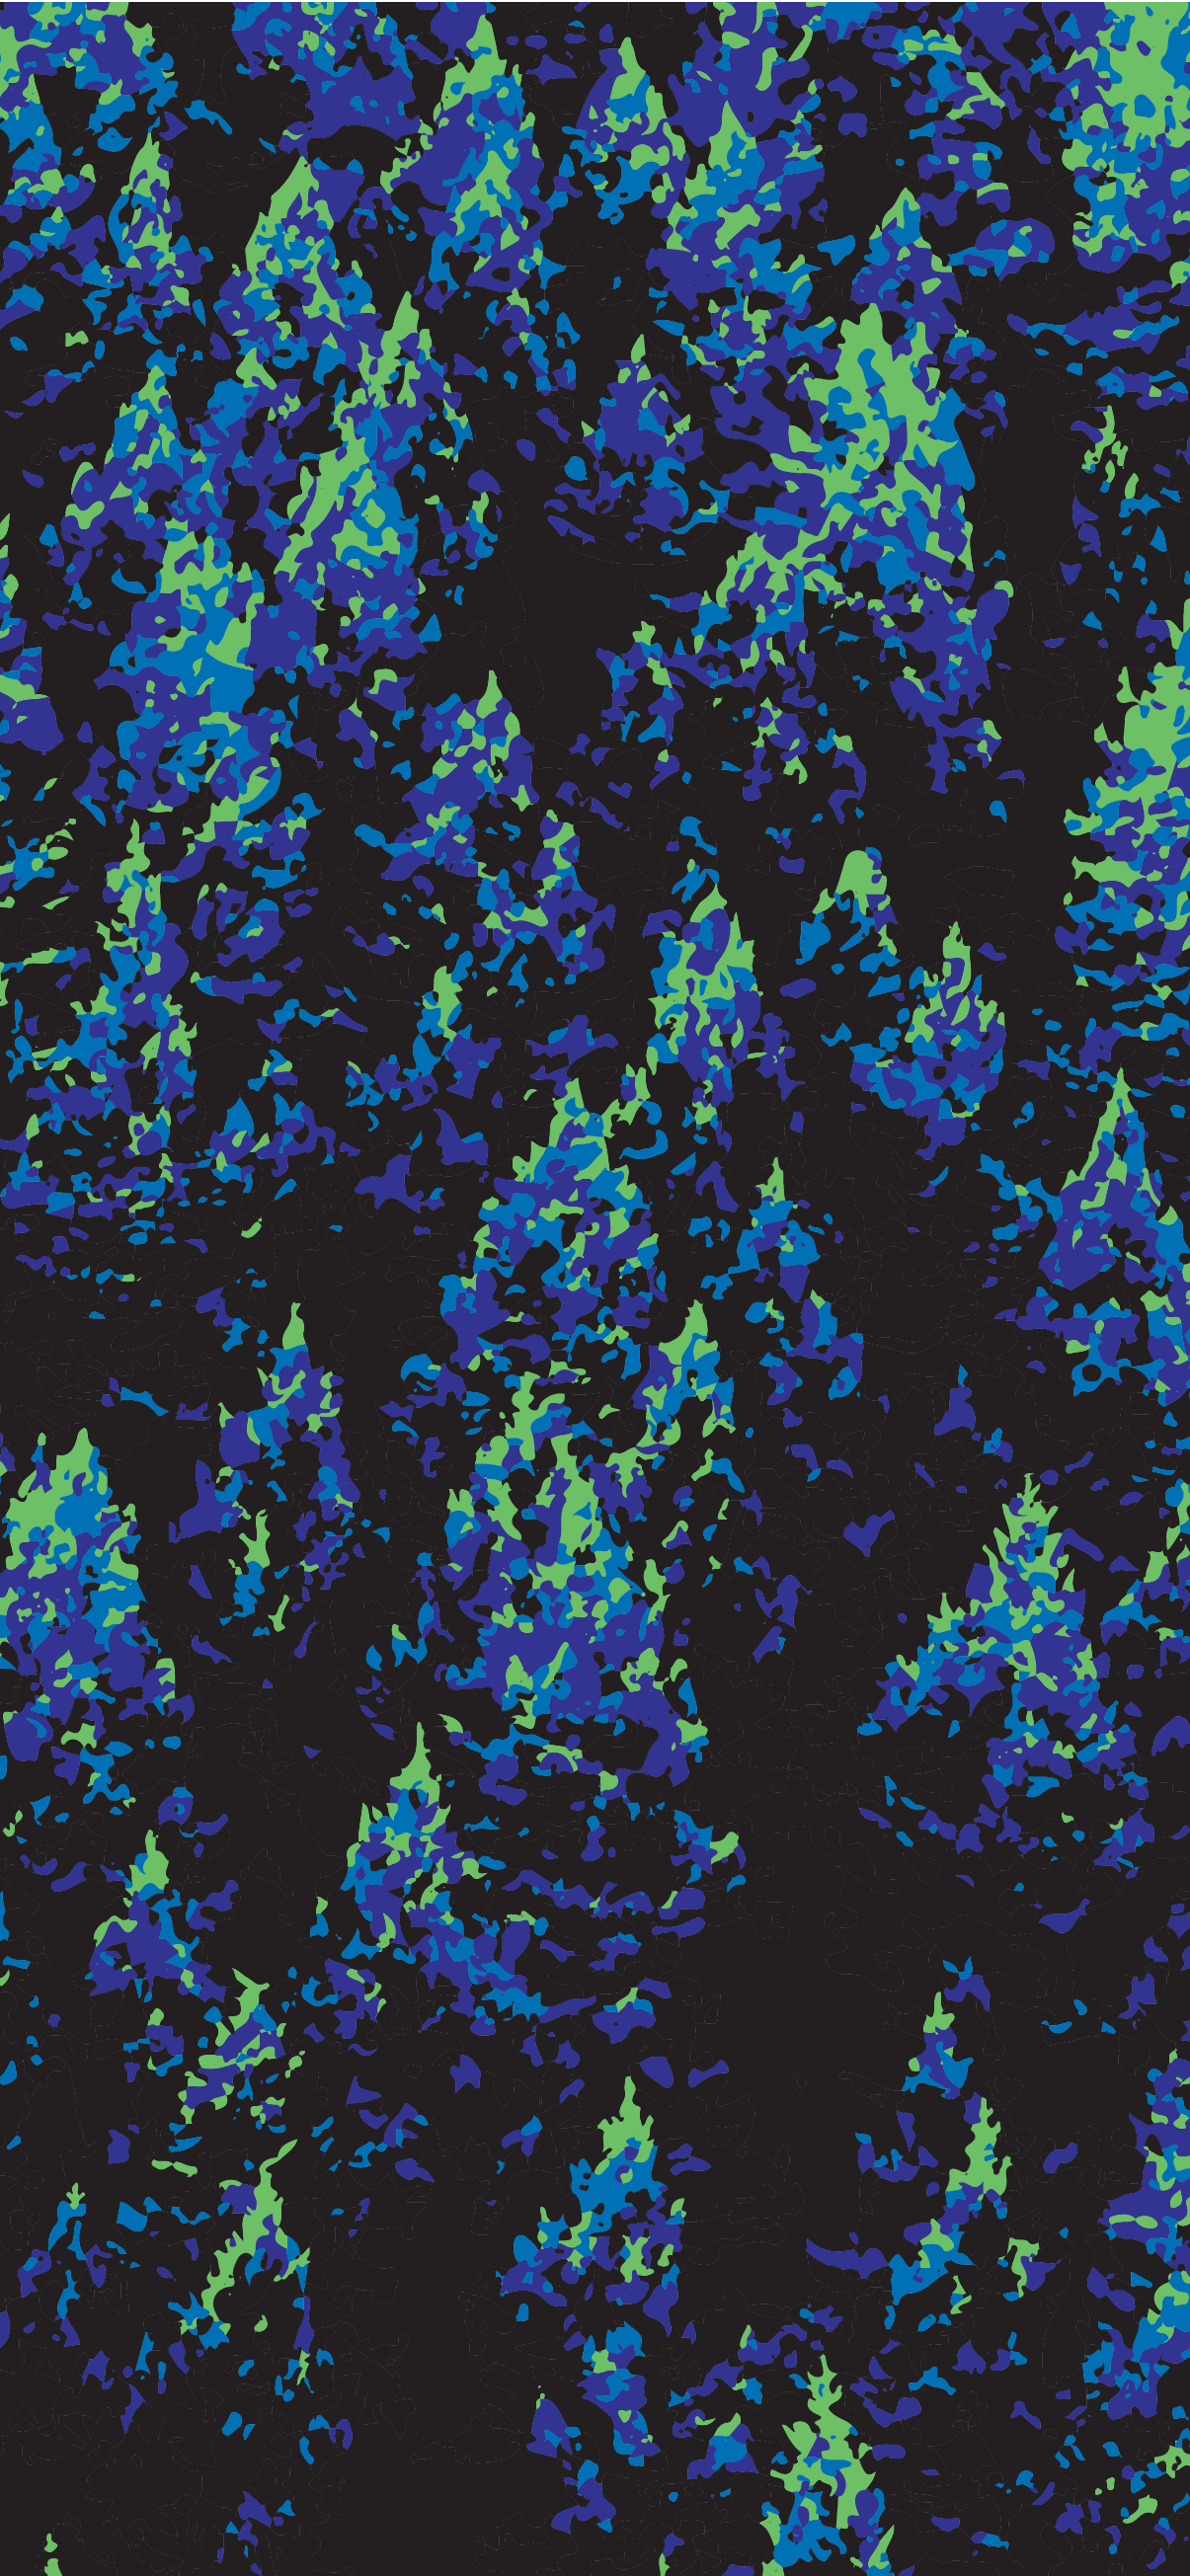 A black background with blue and green pine trees - Forest